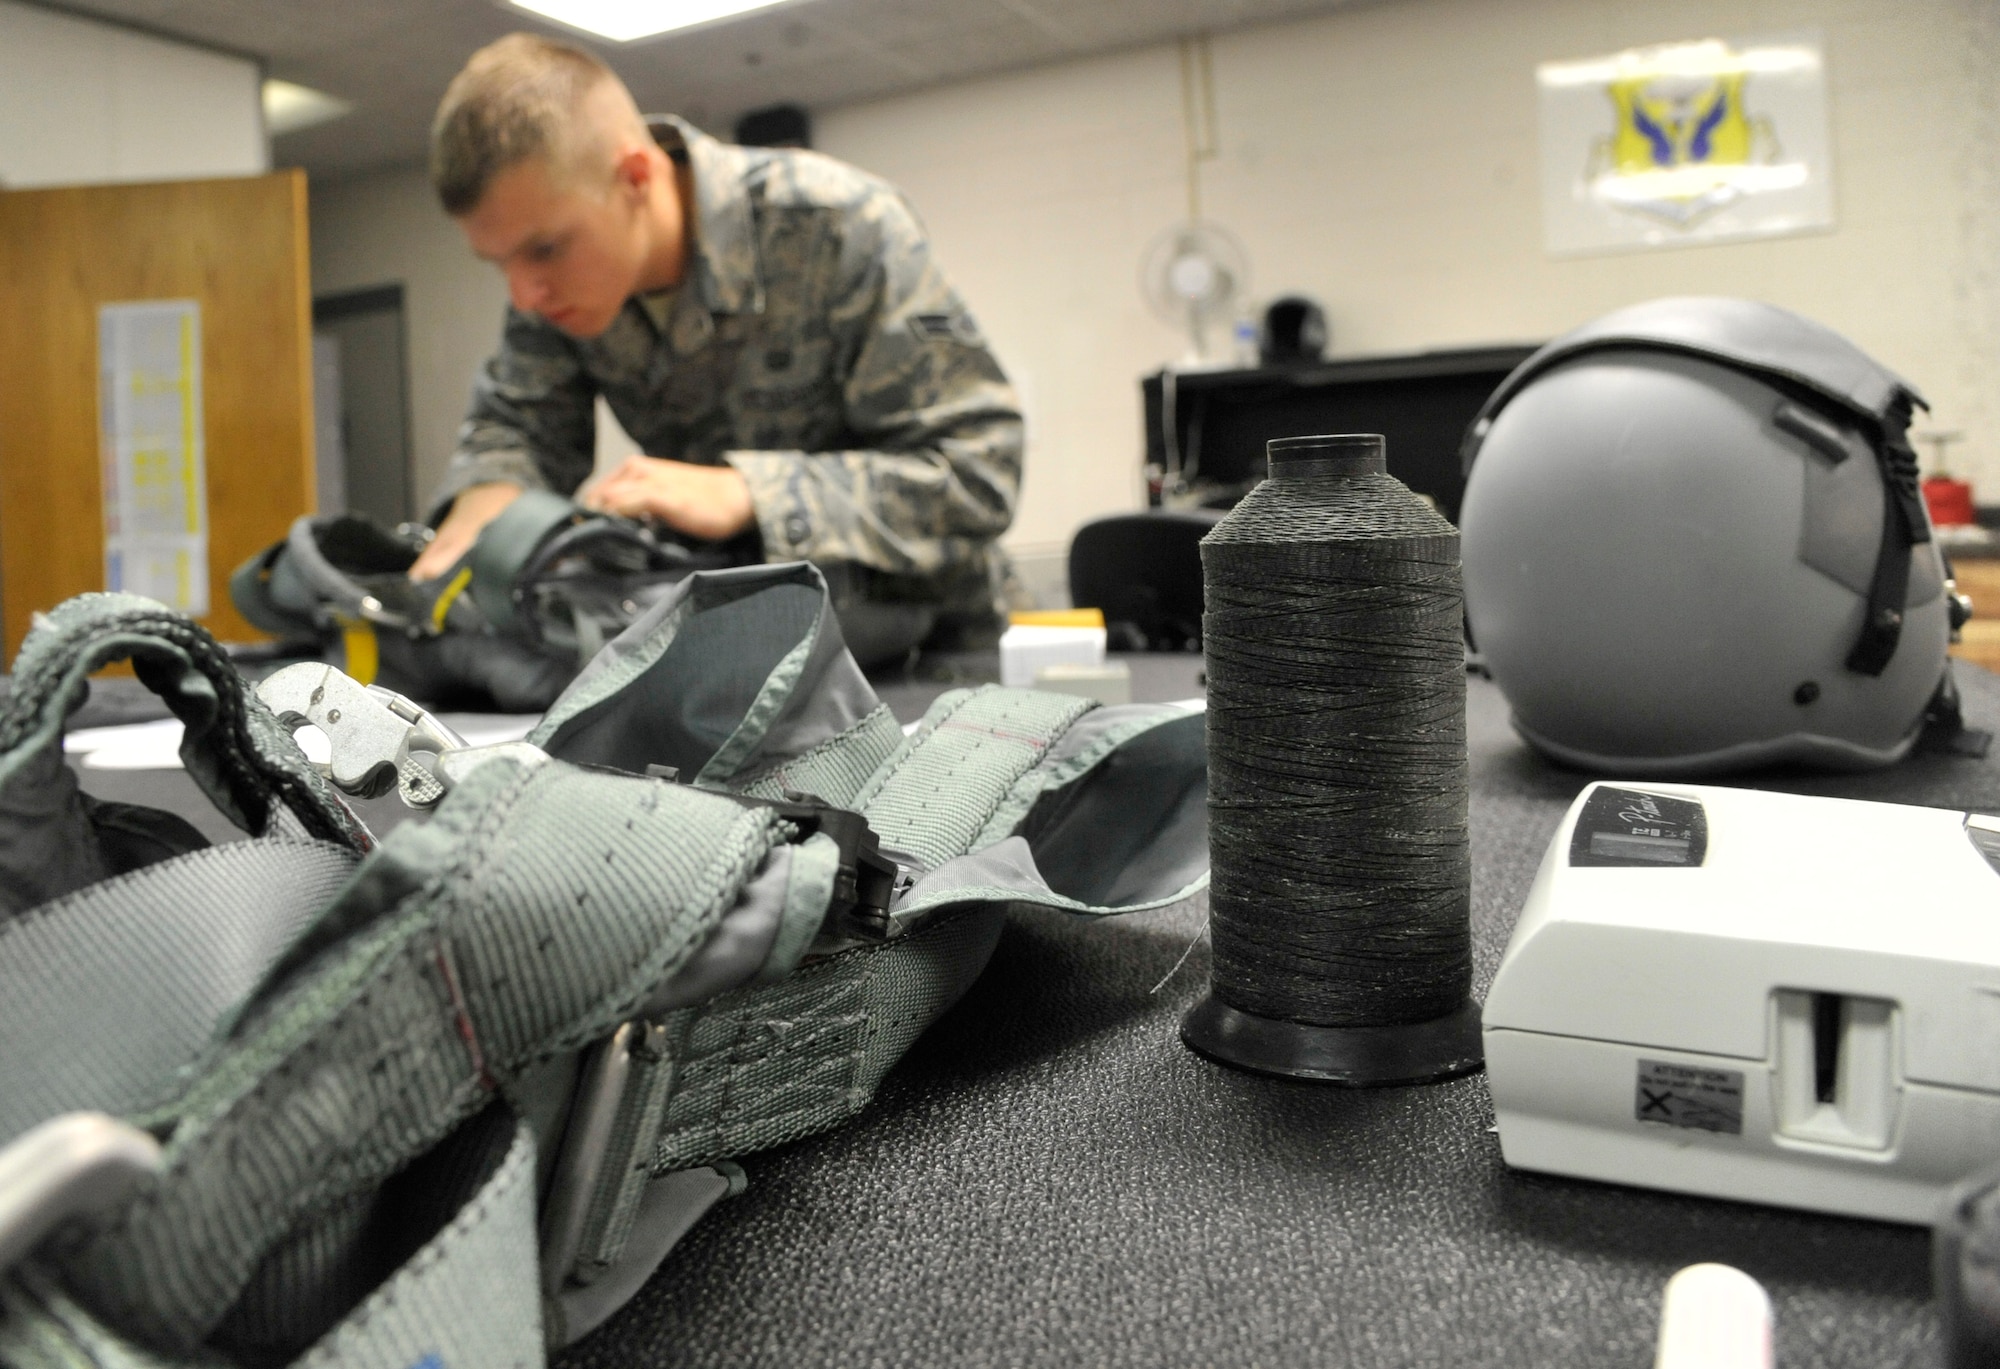 U.S. Air Force Airman 1st Class William Butler, 509th Operations Support Squadron aircrew flight equipment technician, inspects a back automatic-22 parachute at Whiteman Air Force Base, Mo., Oct. 9, 2013. AFE technicians perform daily inspections of equipment to ensure it is functioning properly.. (U.S. Air Force photo by Airman 1st Class Keenan Berry/Released)